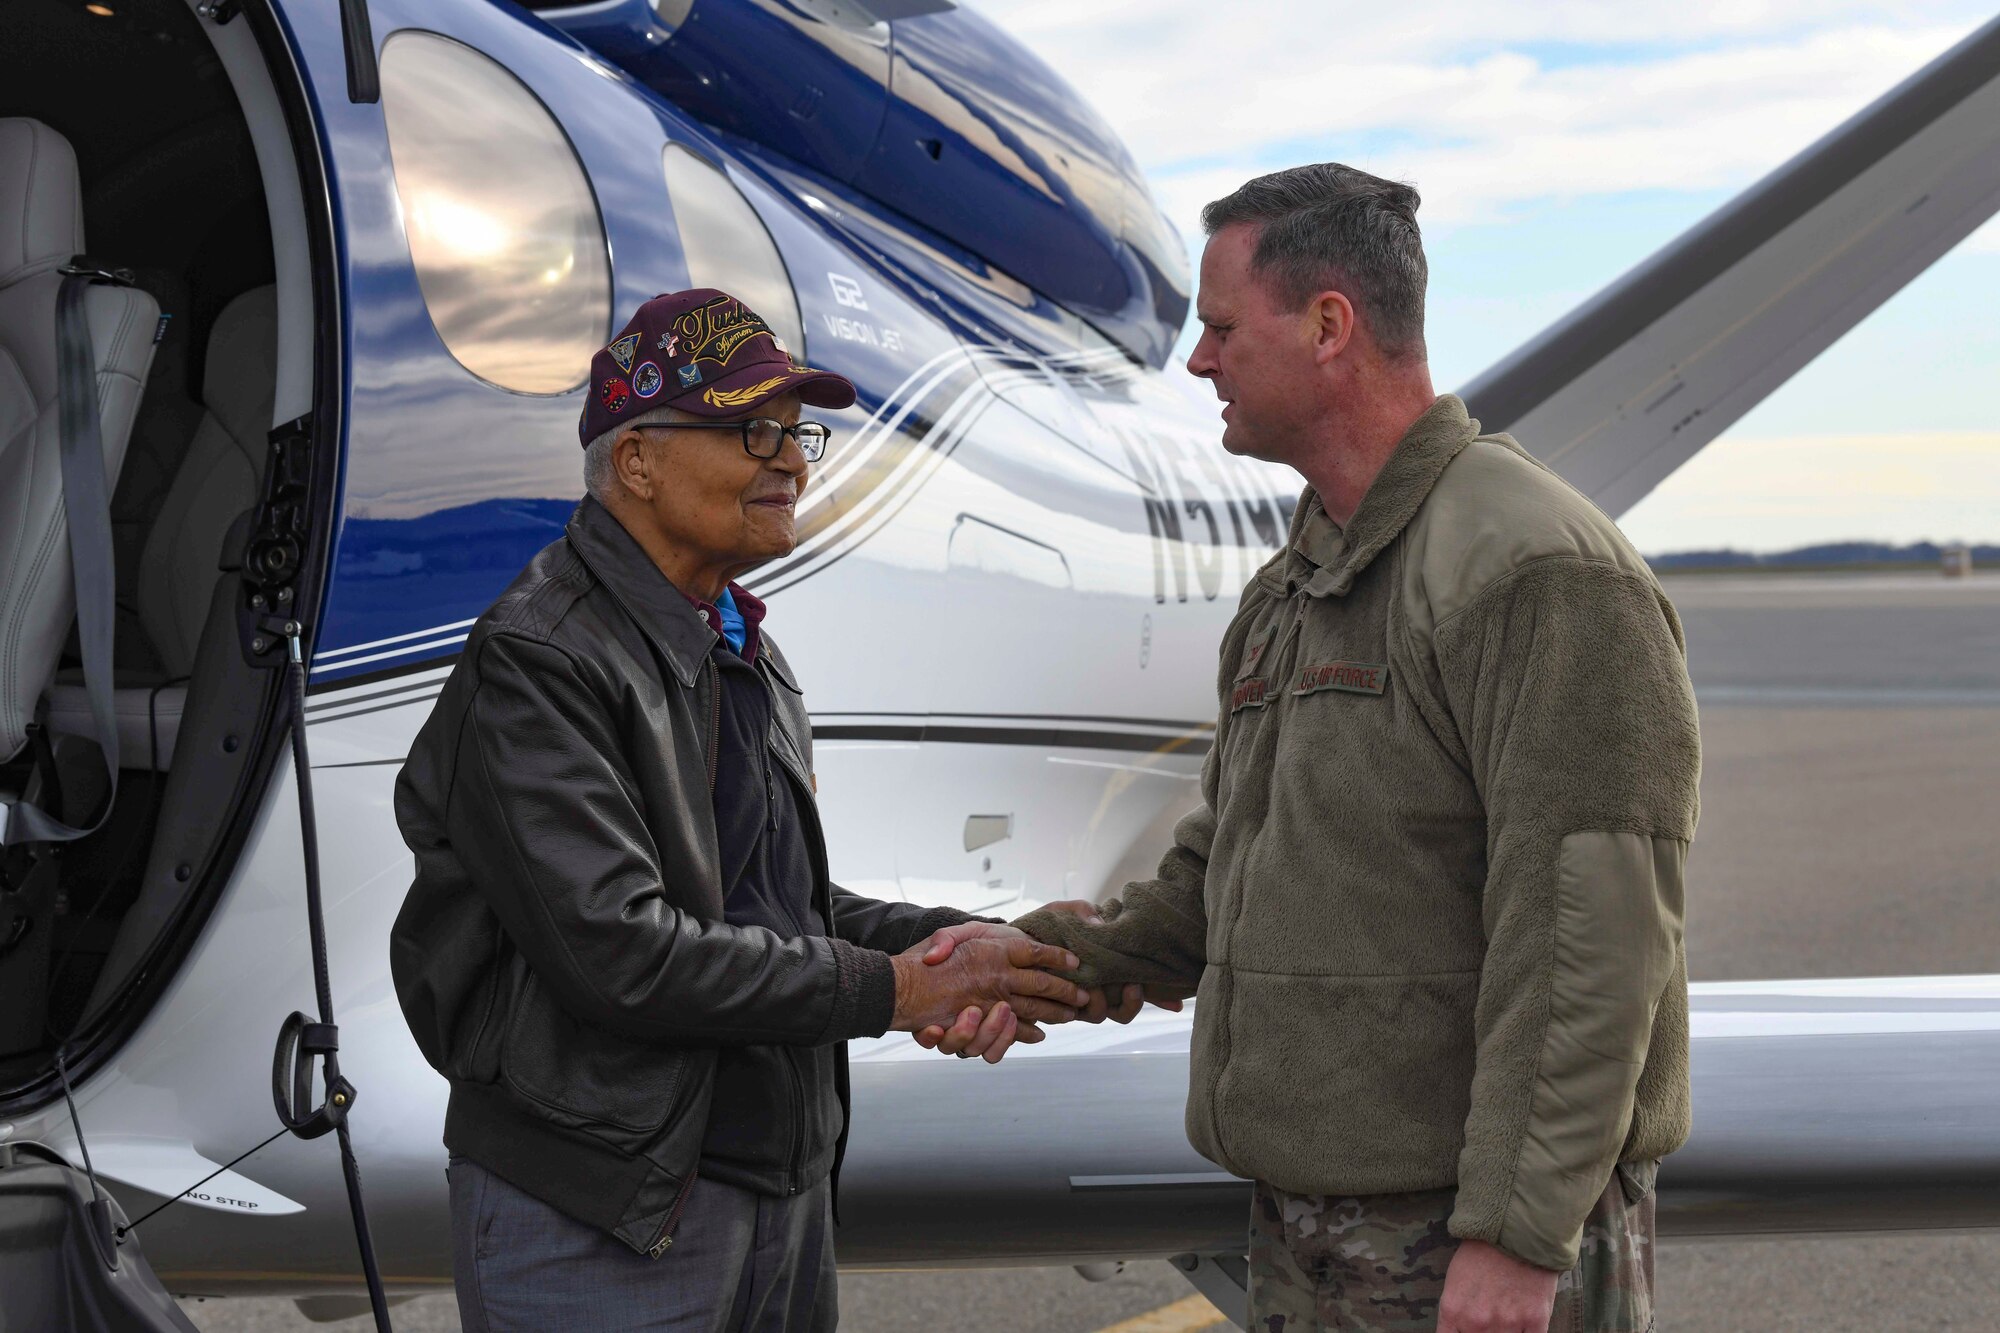 Former Tuskegee Airman, retired Col. Charles McGee, shakes 436th Airlift Wing commander Col. Joel Safranek’s hand during his visit Dec. 6, 2019, at Dover Air Force Base, Del. He served a total of 30 years in the U.S. Air Force, beginning with the U.S. Army Air Corps, and flew a total of 409 combat missions in World War II, Korea and Vietnam. The Tuskegee program began in 1941 when the 99th Pursuit Squadron was established, and its Airmen were the first ever African-American military aviators in the U.S. Army Air Corps. (U.S. Air Force photo by Senior Airman Christopher Quail)